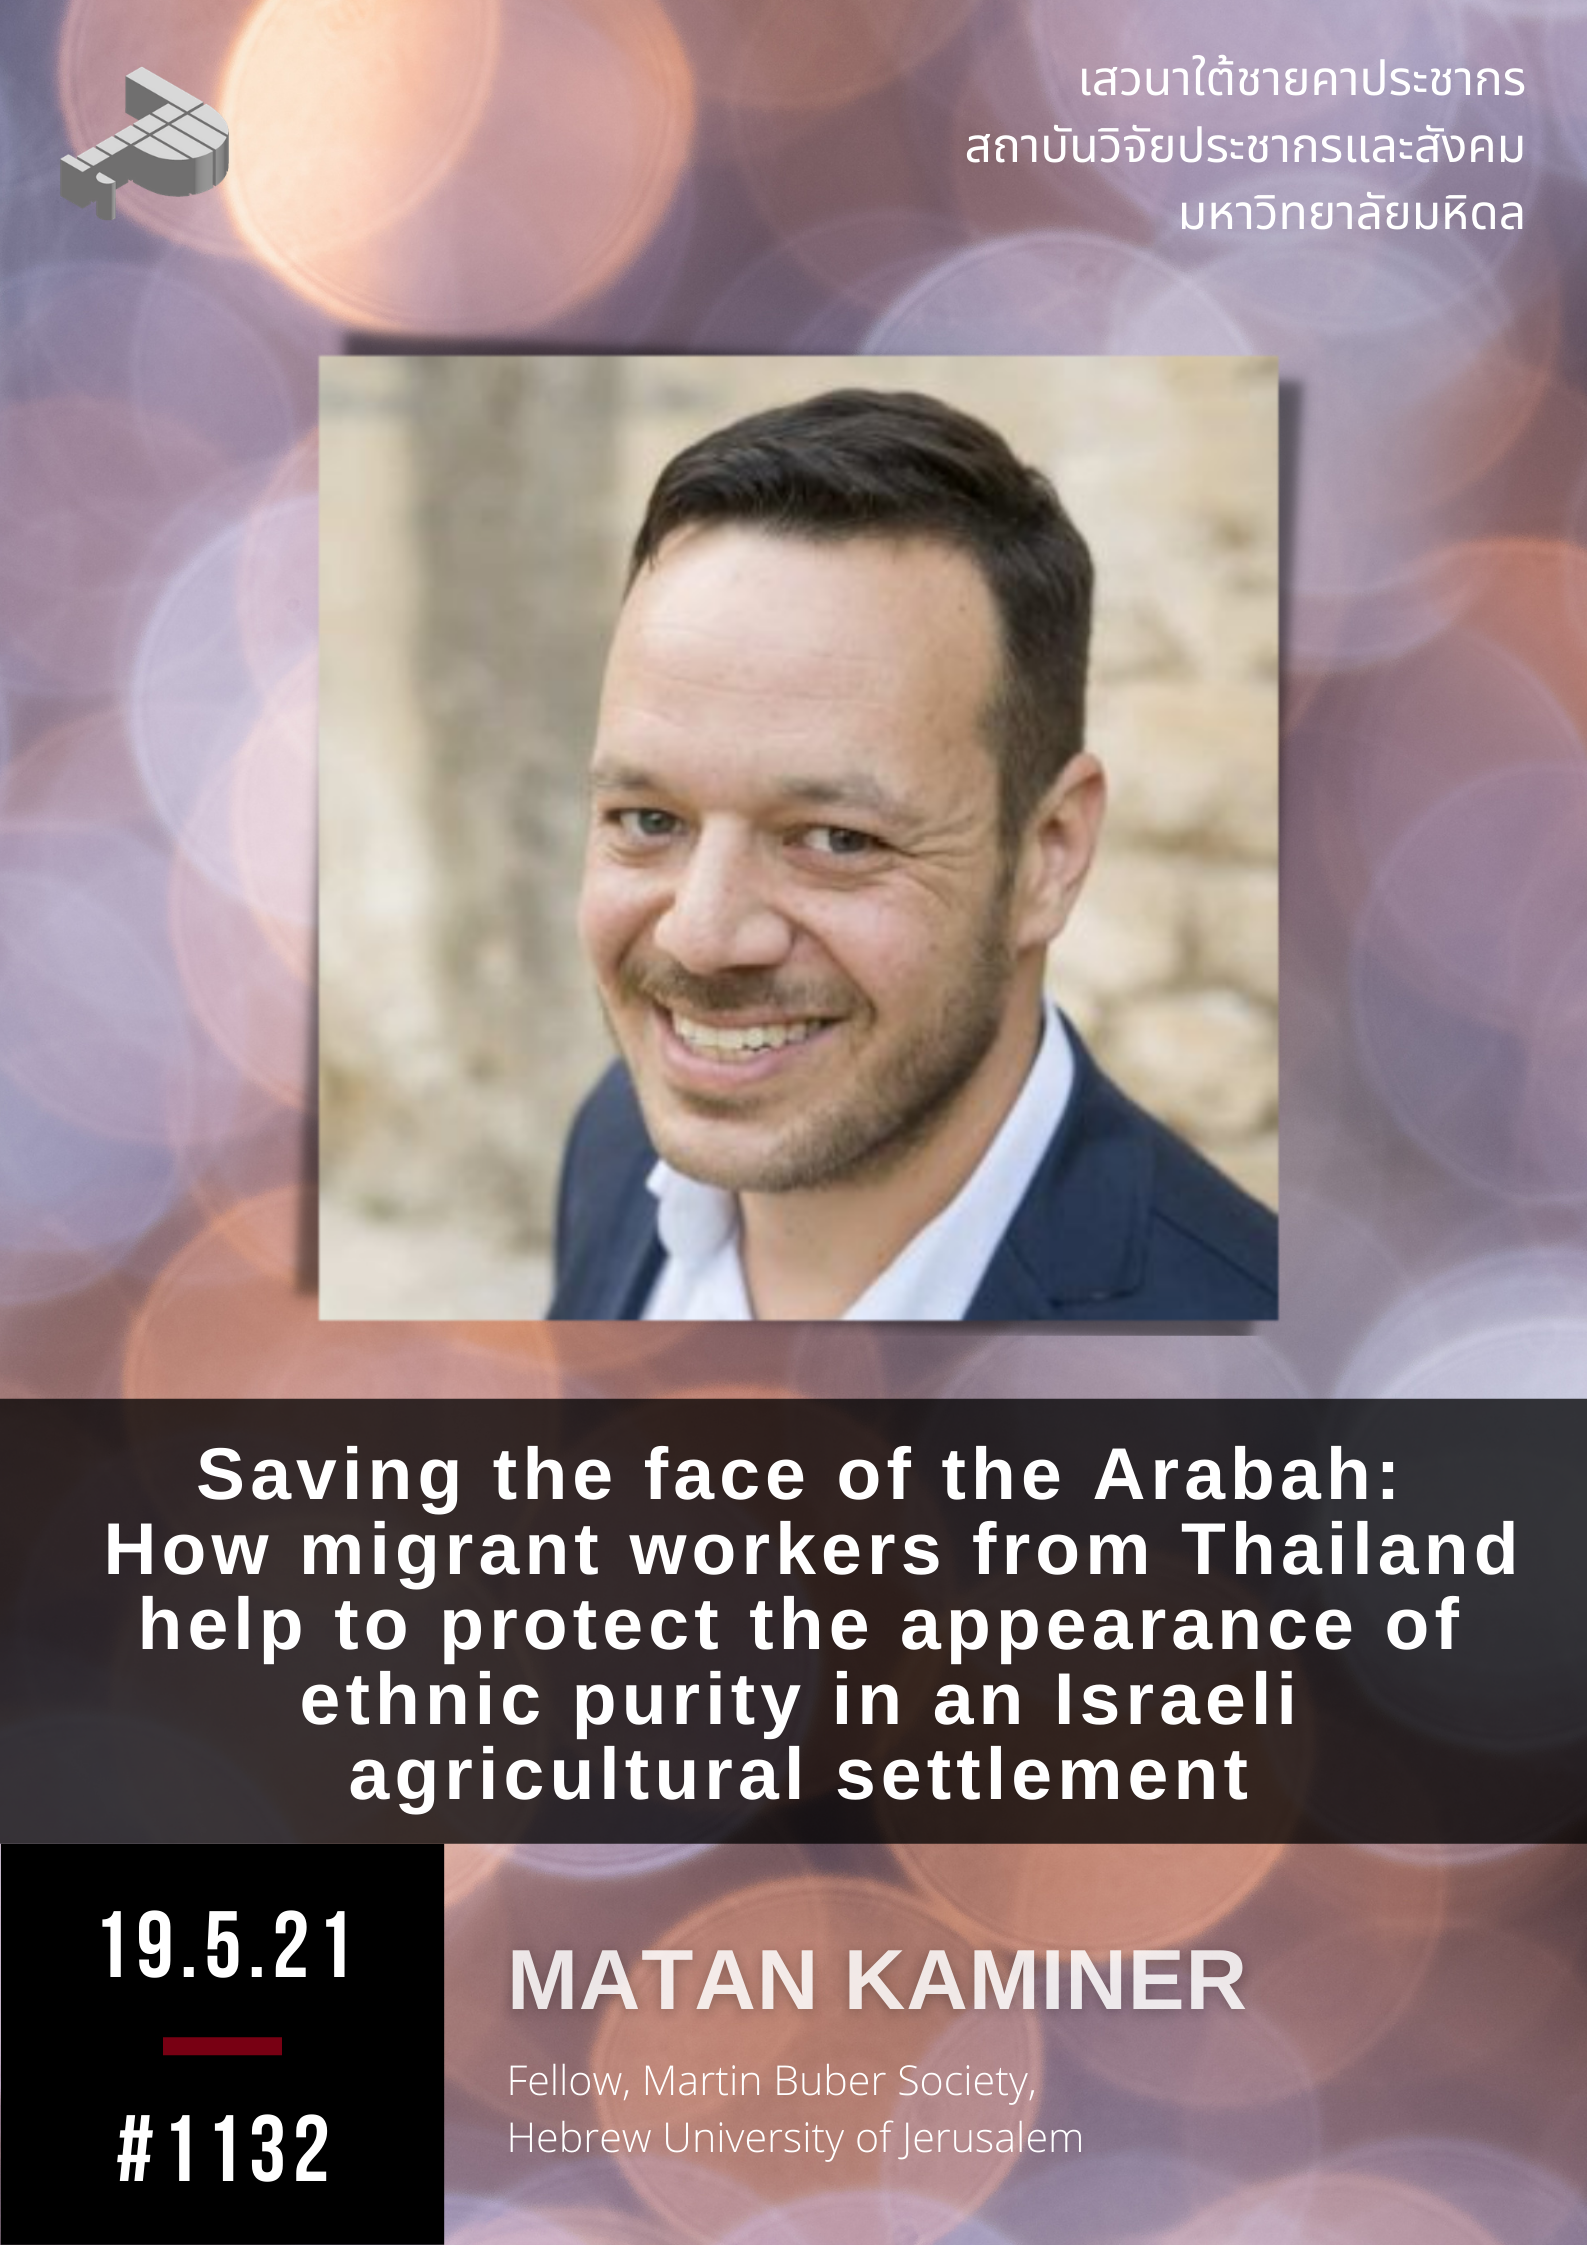 Saving the face of the Arabah: How migrant workers from Thailand help to protect the appearance of ethnic purity in an Israeli agricultural settlement